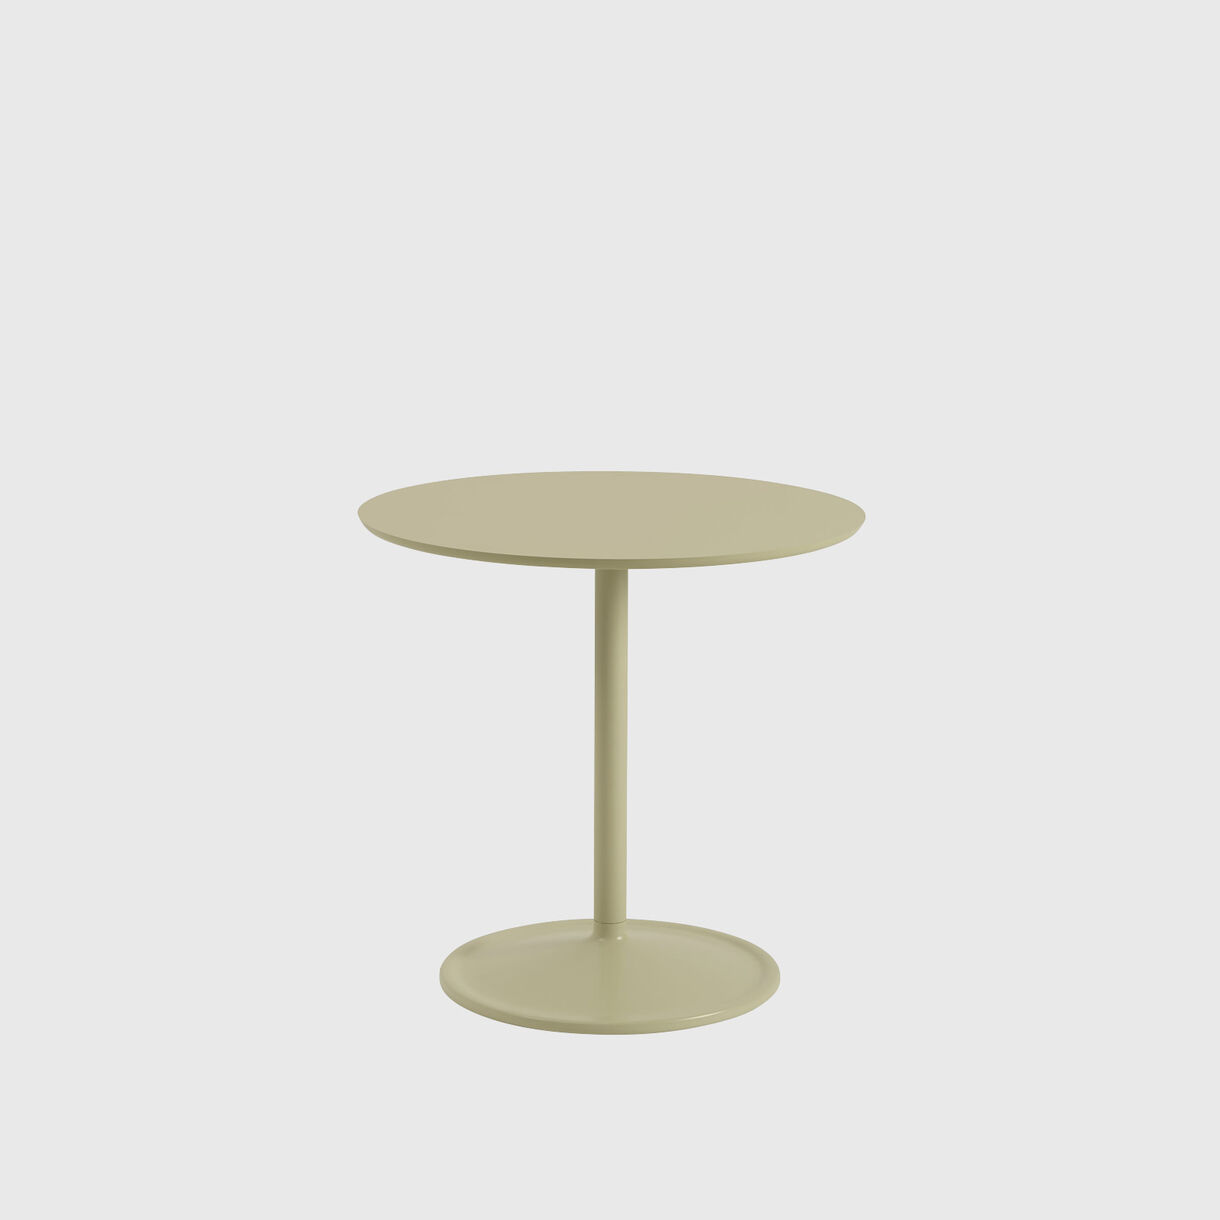 Soft Cafe Table, Round 75x73, Beige Green